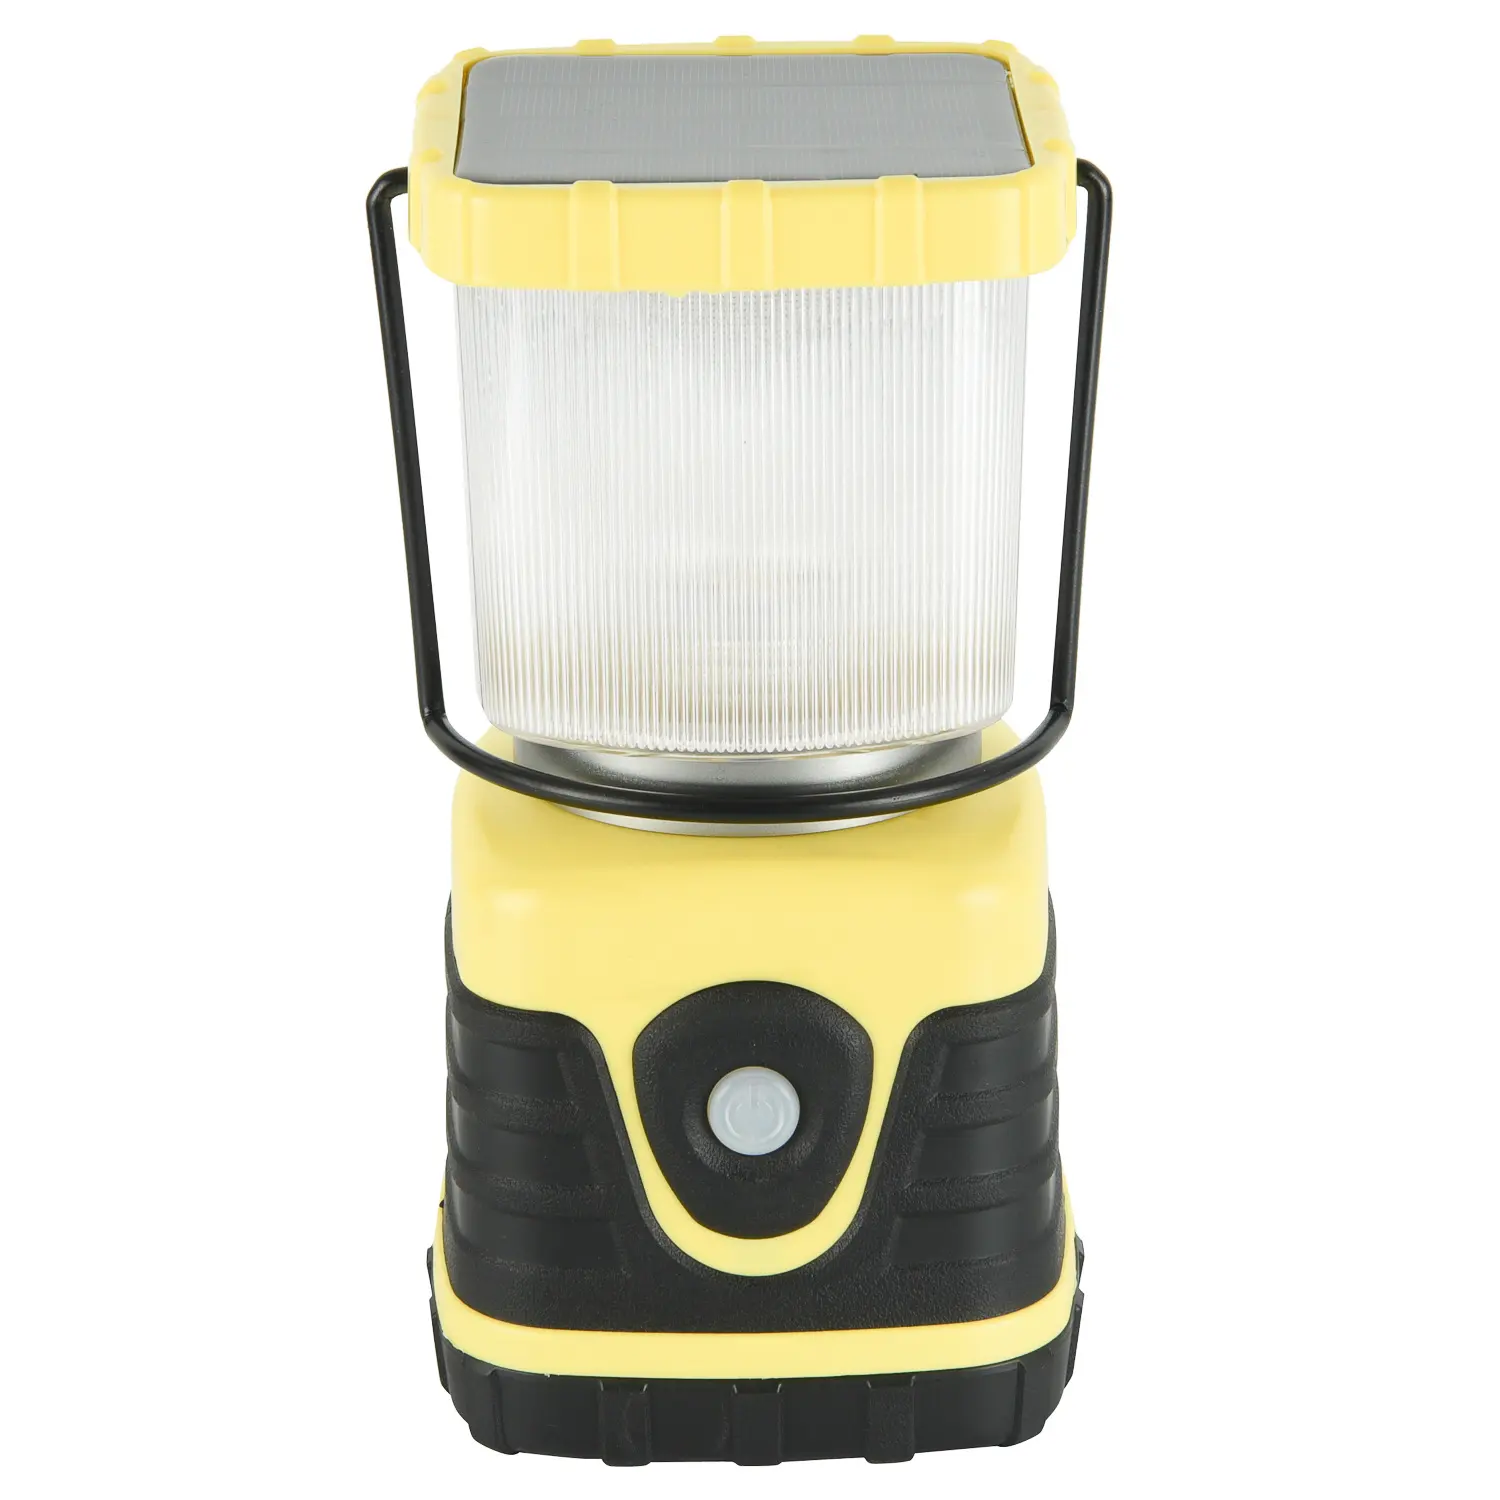 Portable USB Camping Lamp Lighting Multifunction Outdoor Lantern Lamp Built in Power Bank Rechargeable LED Emergency Light